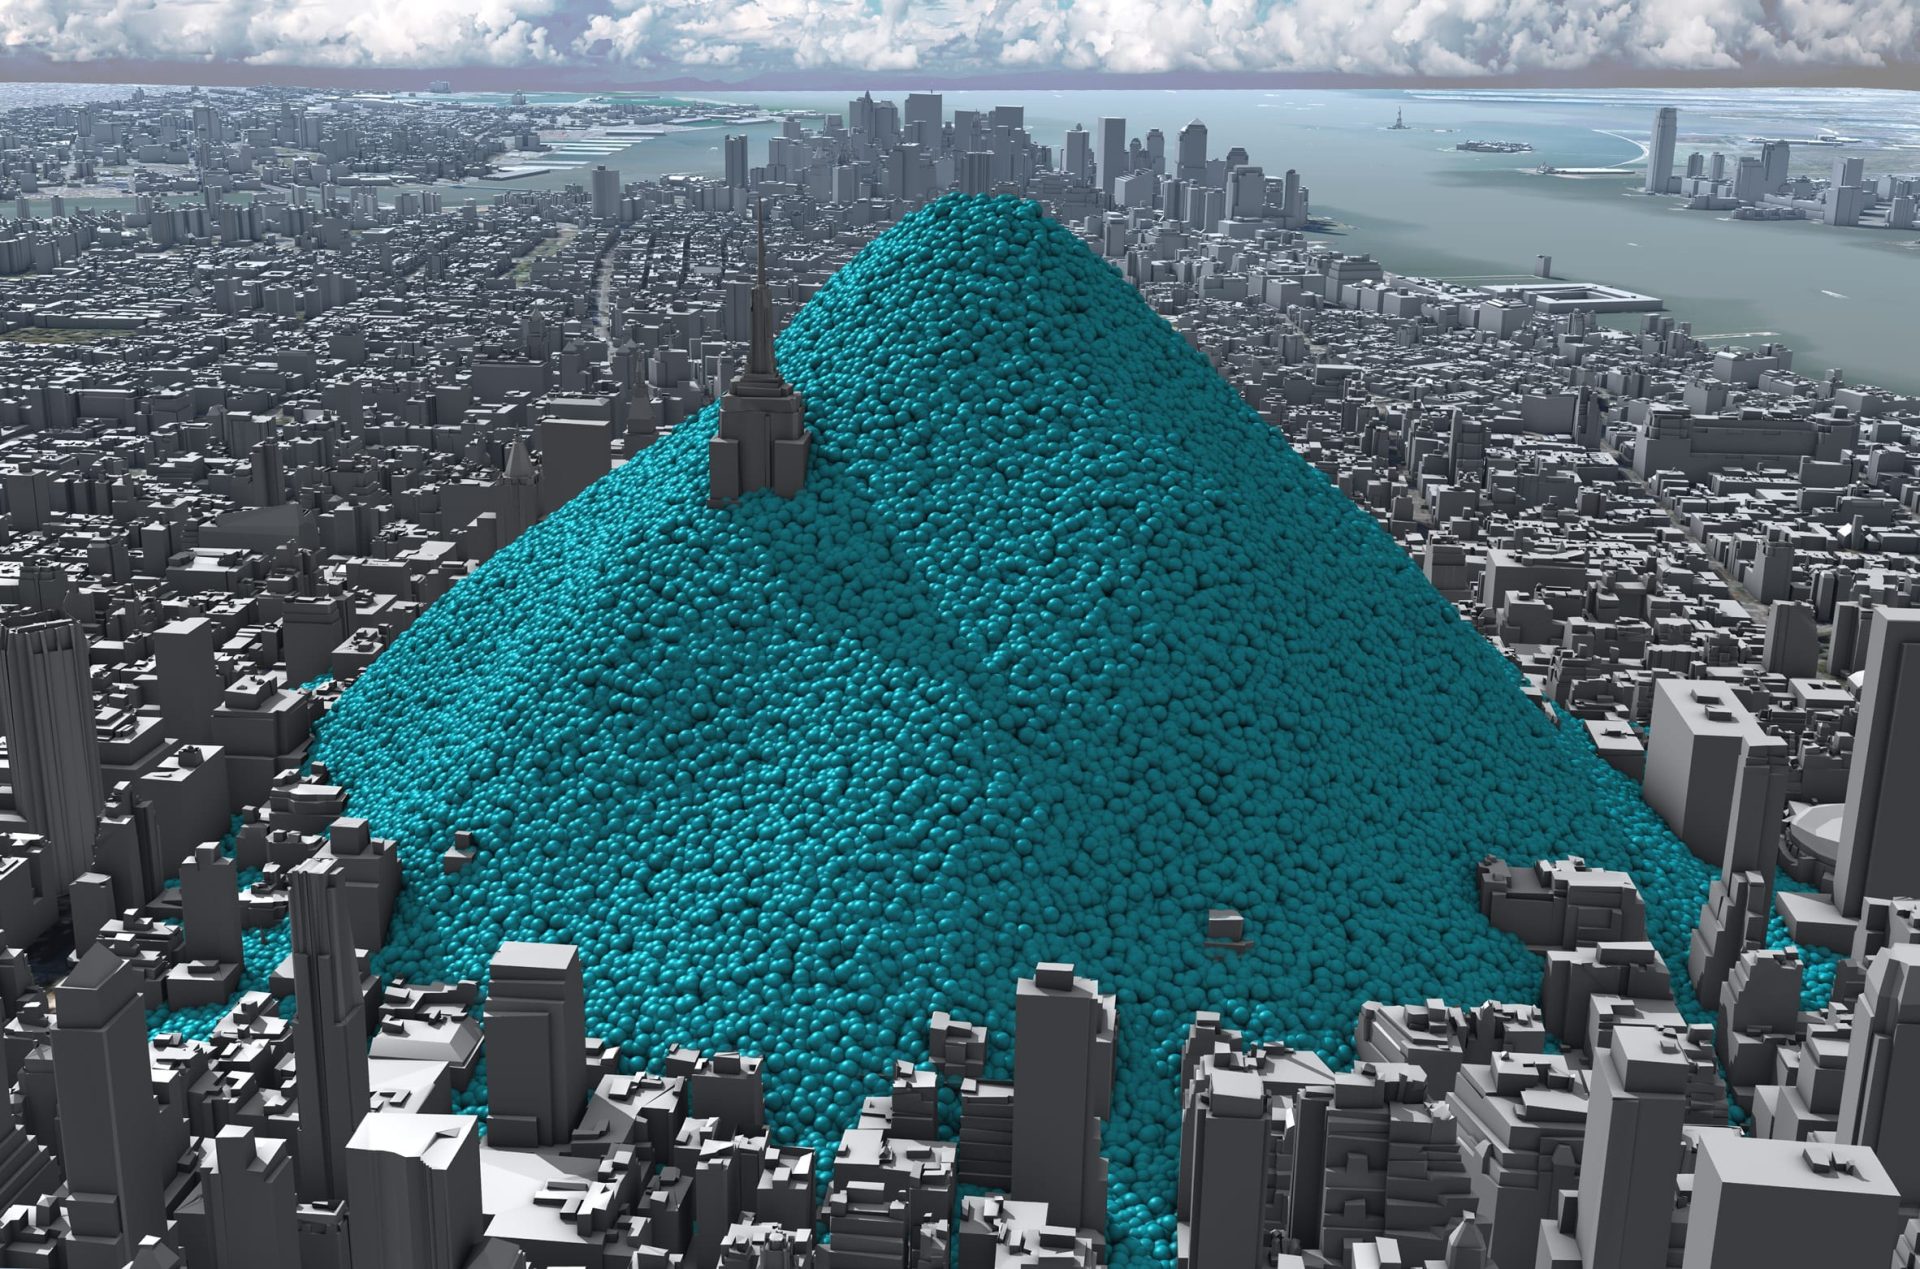 Blue bubbles helped "make the cause of climate change visible" say visualisers behind viral video